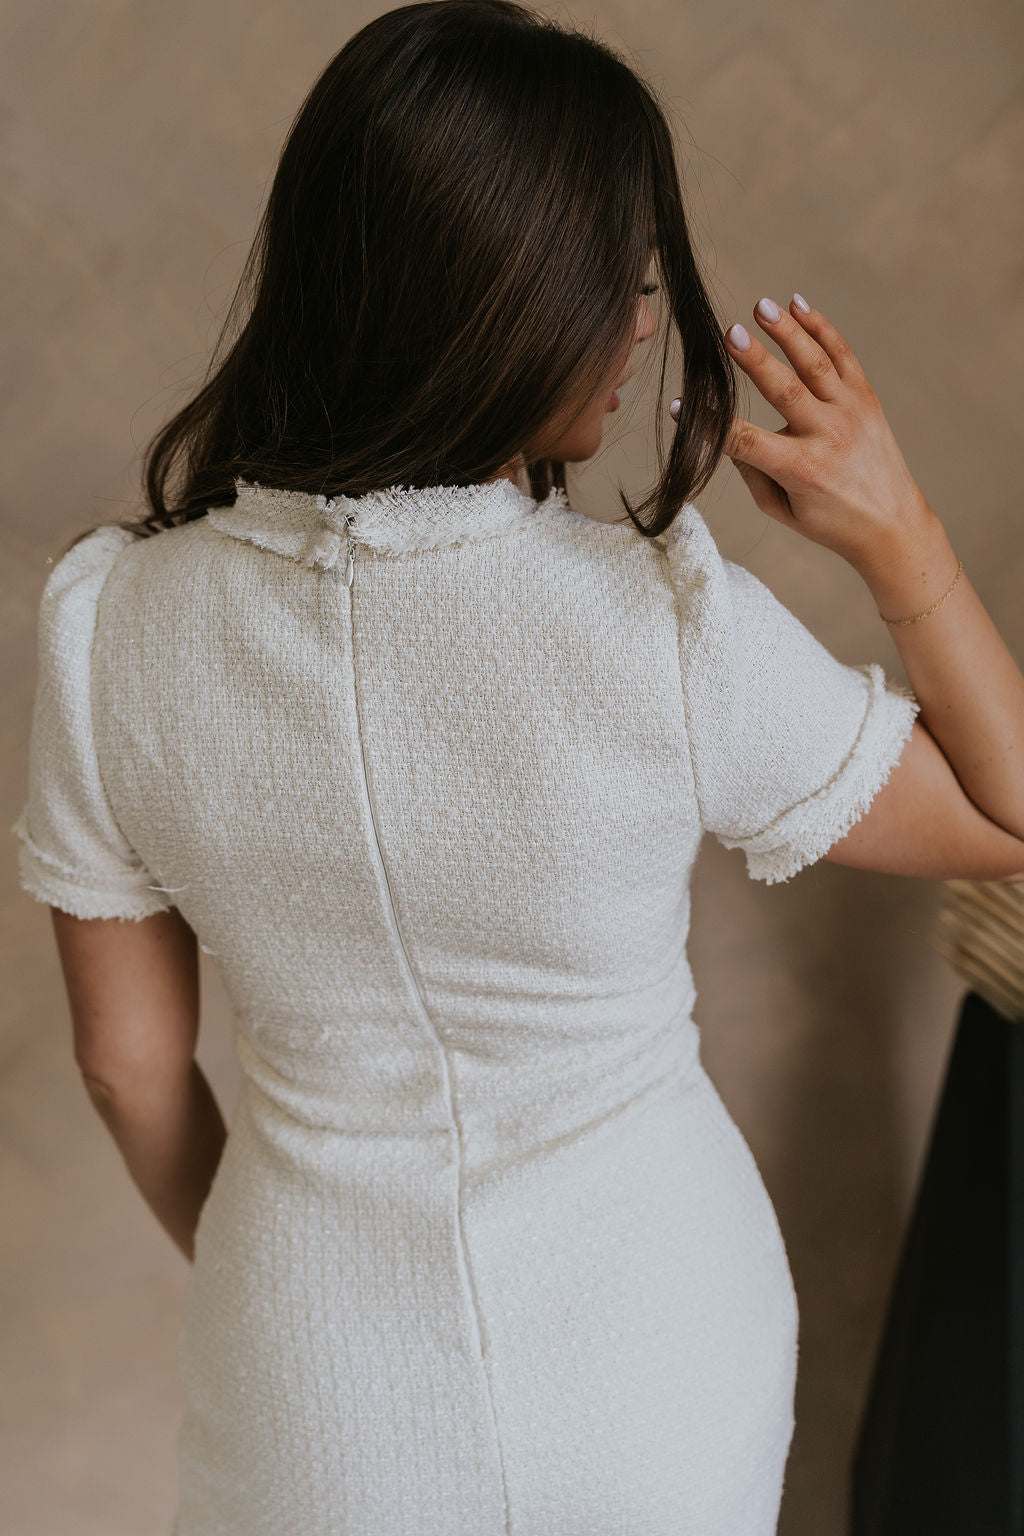 Upper body back view of 5'5" female model wearing the Demi Tweed Short Sleeve Mini Dress in Off White that has off white tweed fabric, short sleeves with puff shoulders, a high round neck, and back zipper.